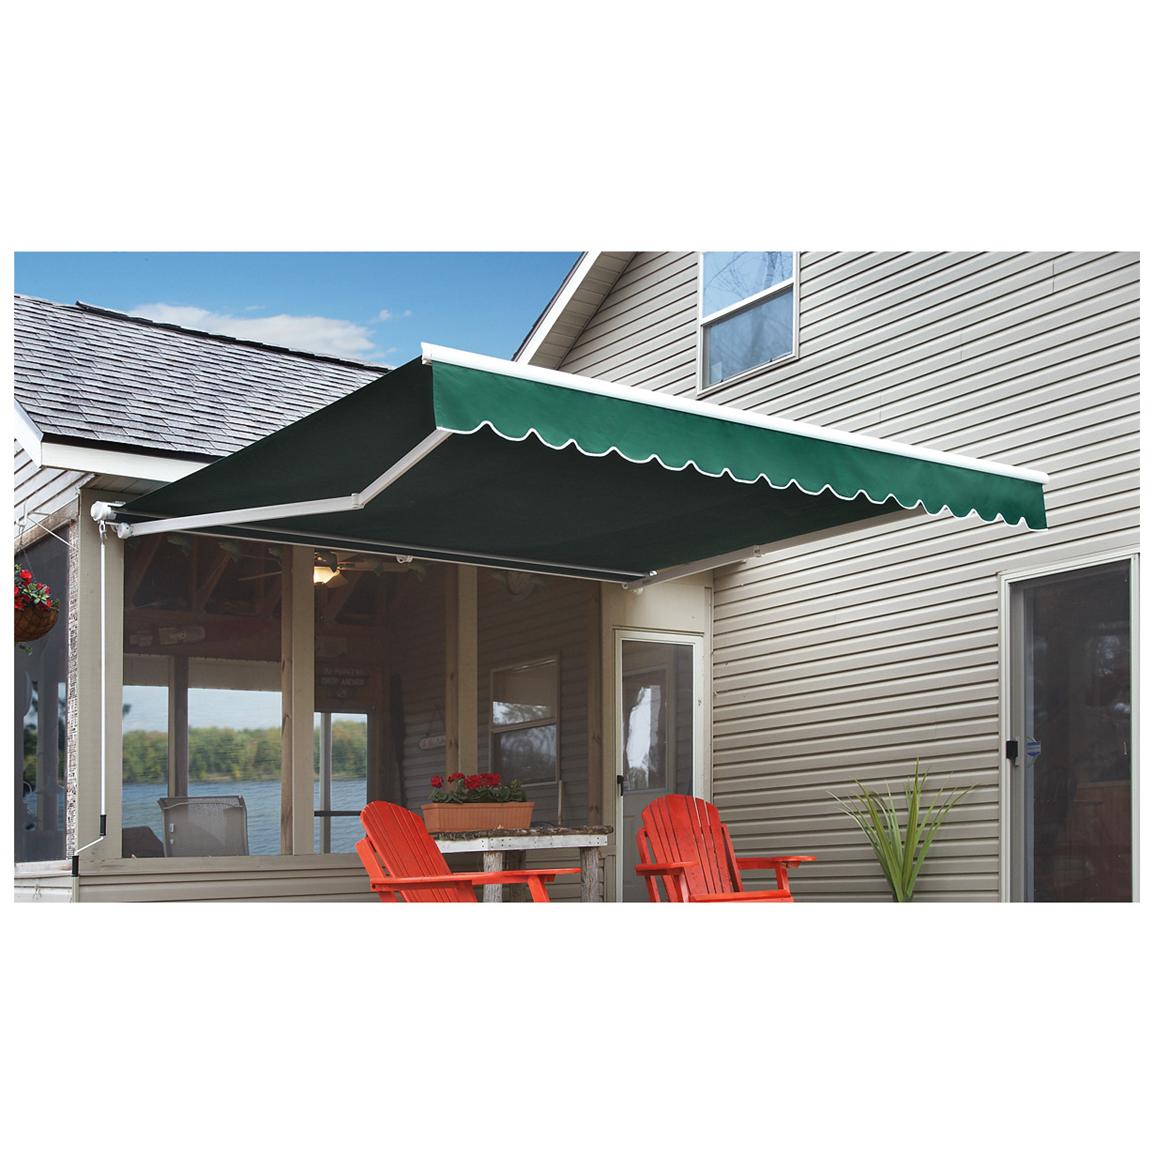 CASTLECREEK Retractable Awning 234396 Awnings Shades At